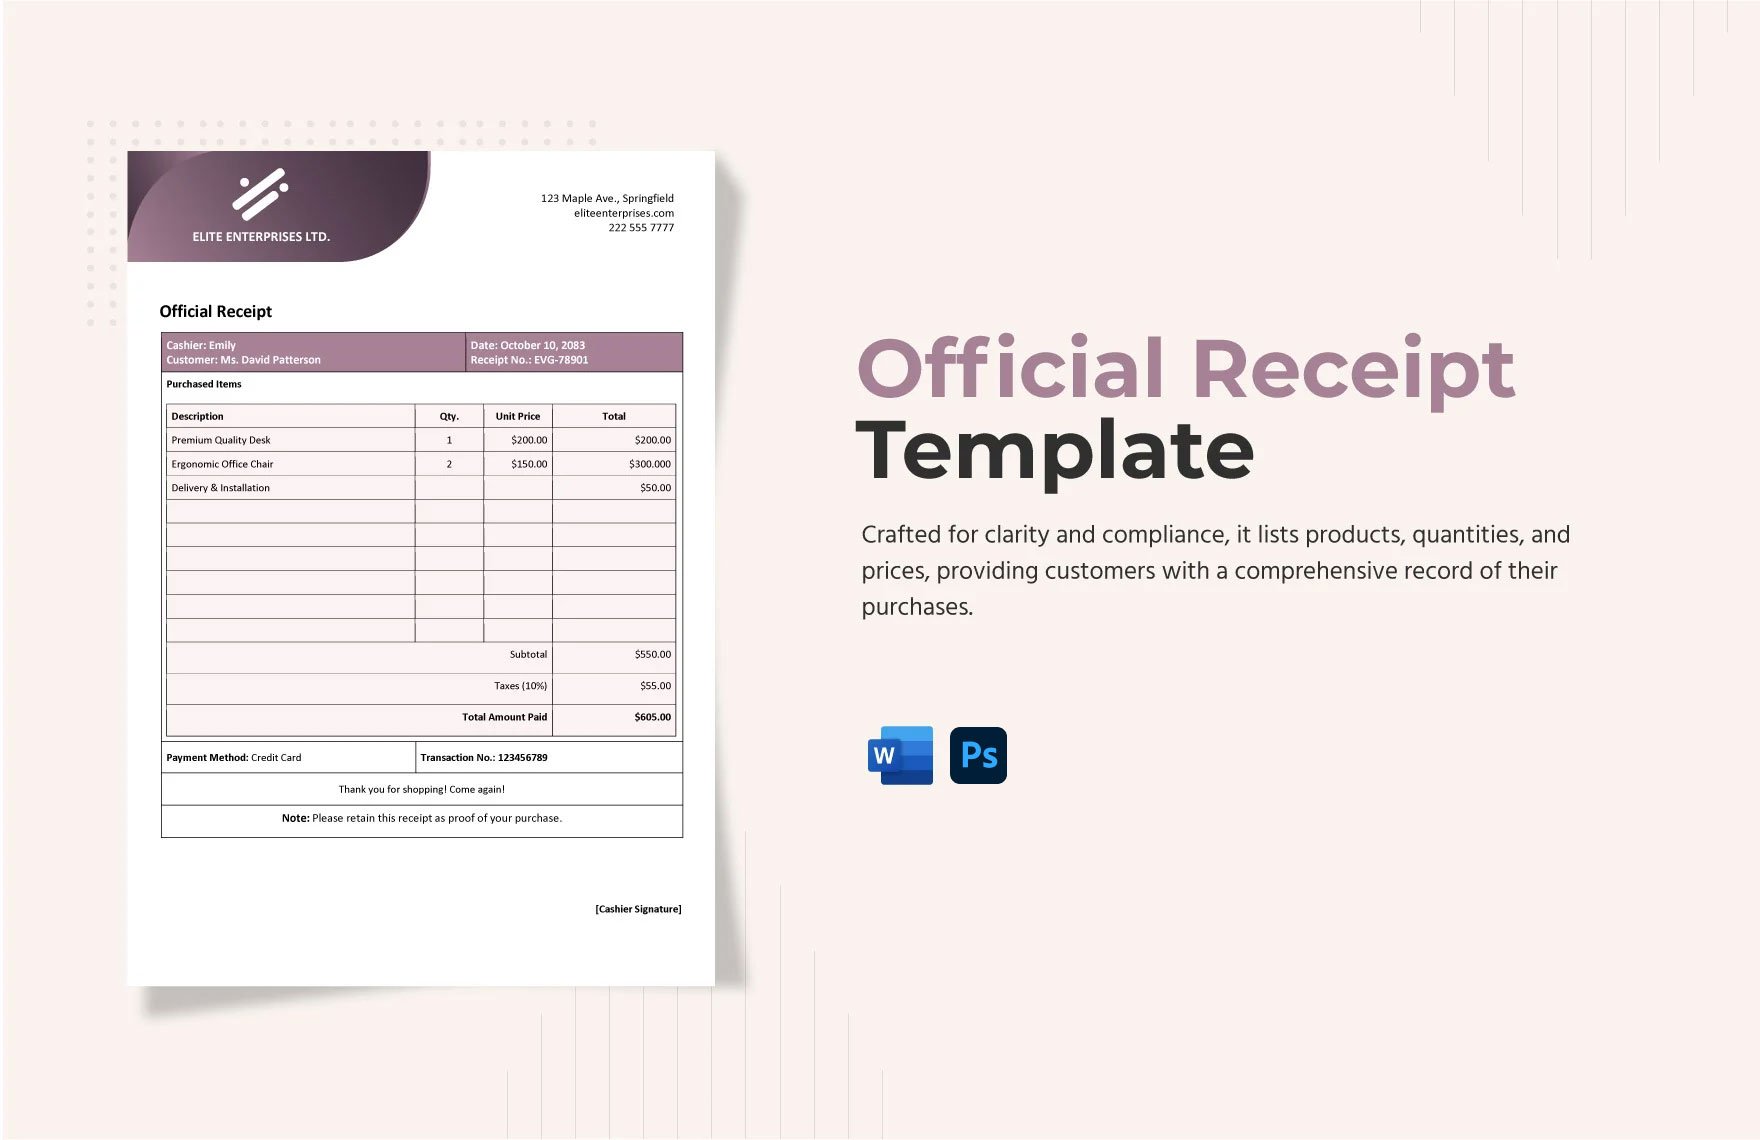 Official Receipt Template - Download in Word, Google Docs, Excel, PDF ...